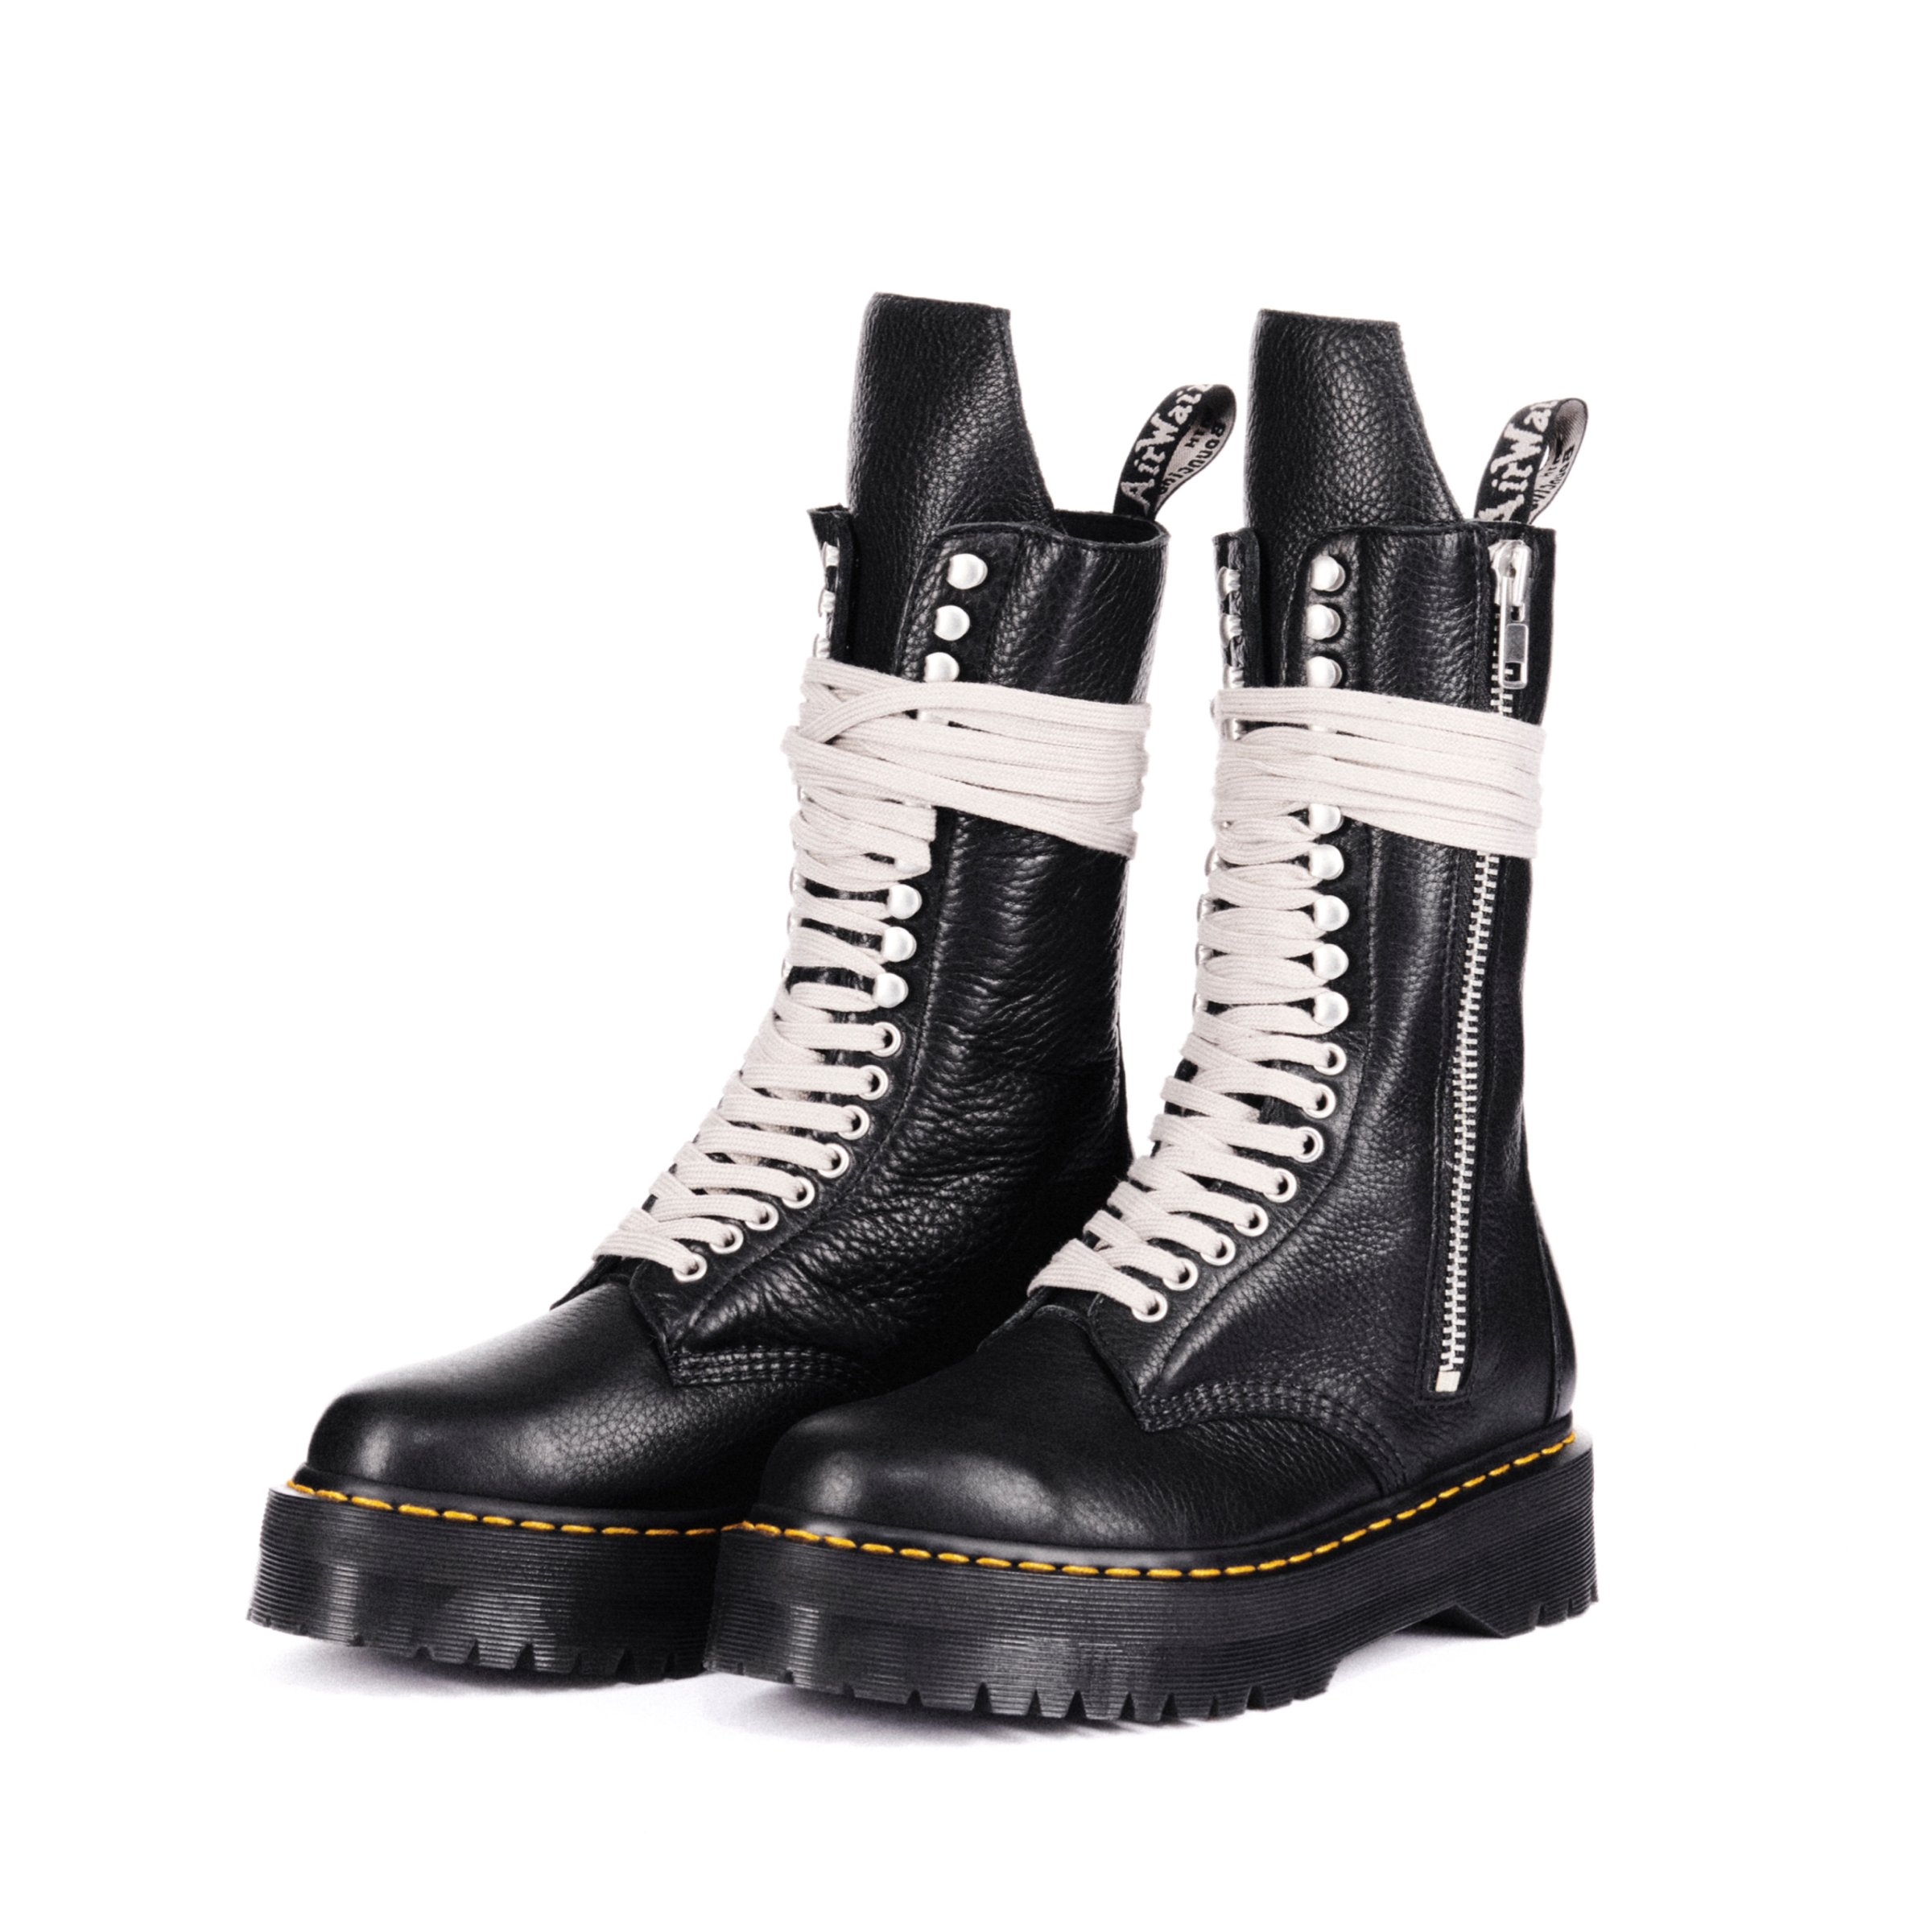 【RICK OWENS】×Dr. Martens 1918 RO-18 HOLE BOOTS (TUMBLE LEATHER)